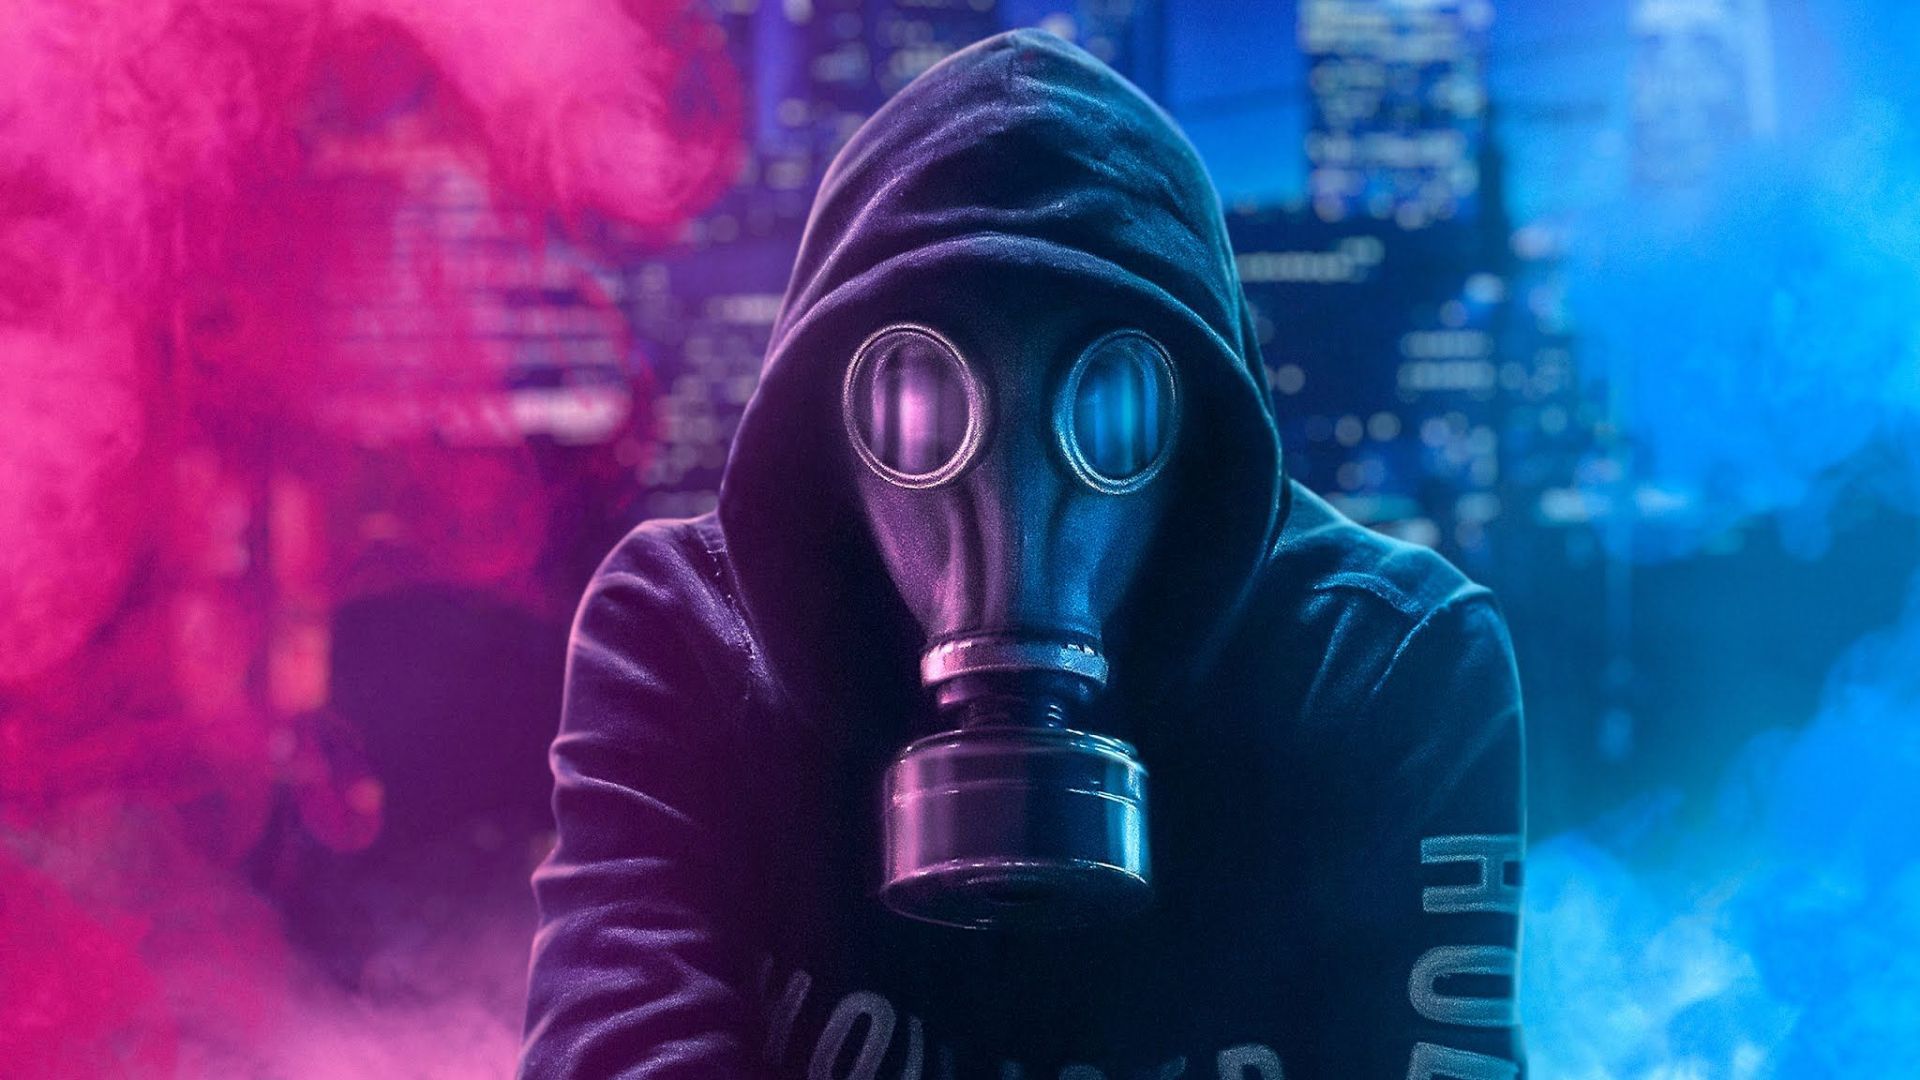 Cool Mask Wallpapers Wallpapers